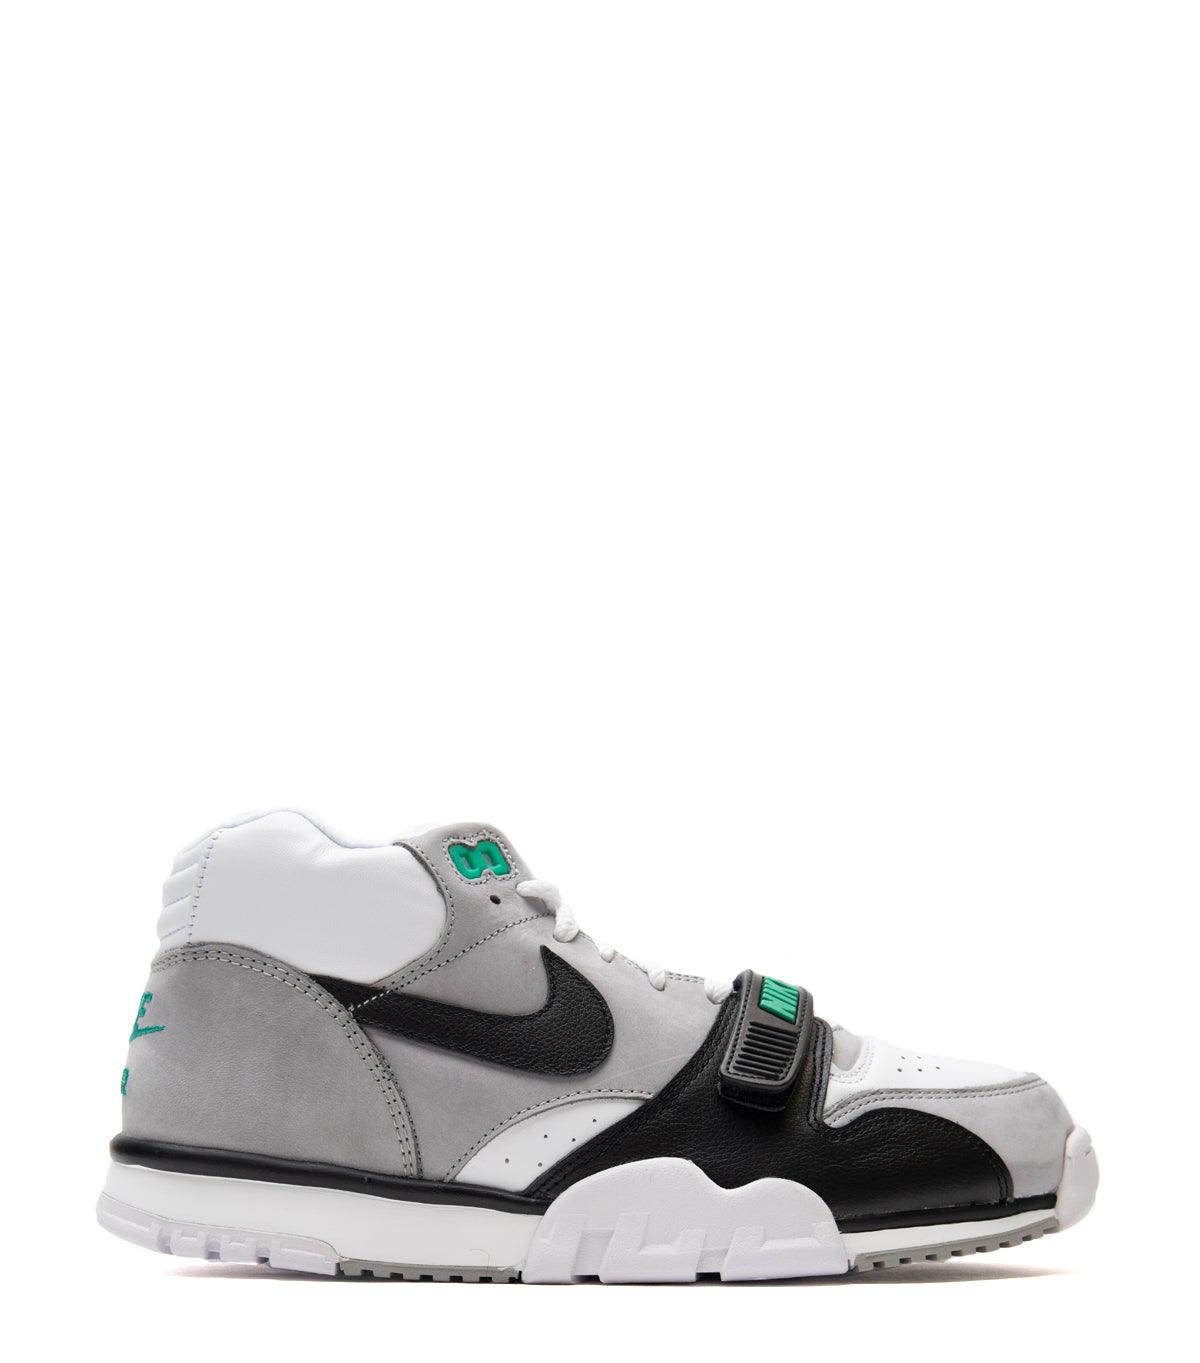 05.20.22 Nike Air Trainer 1 Mid 